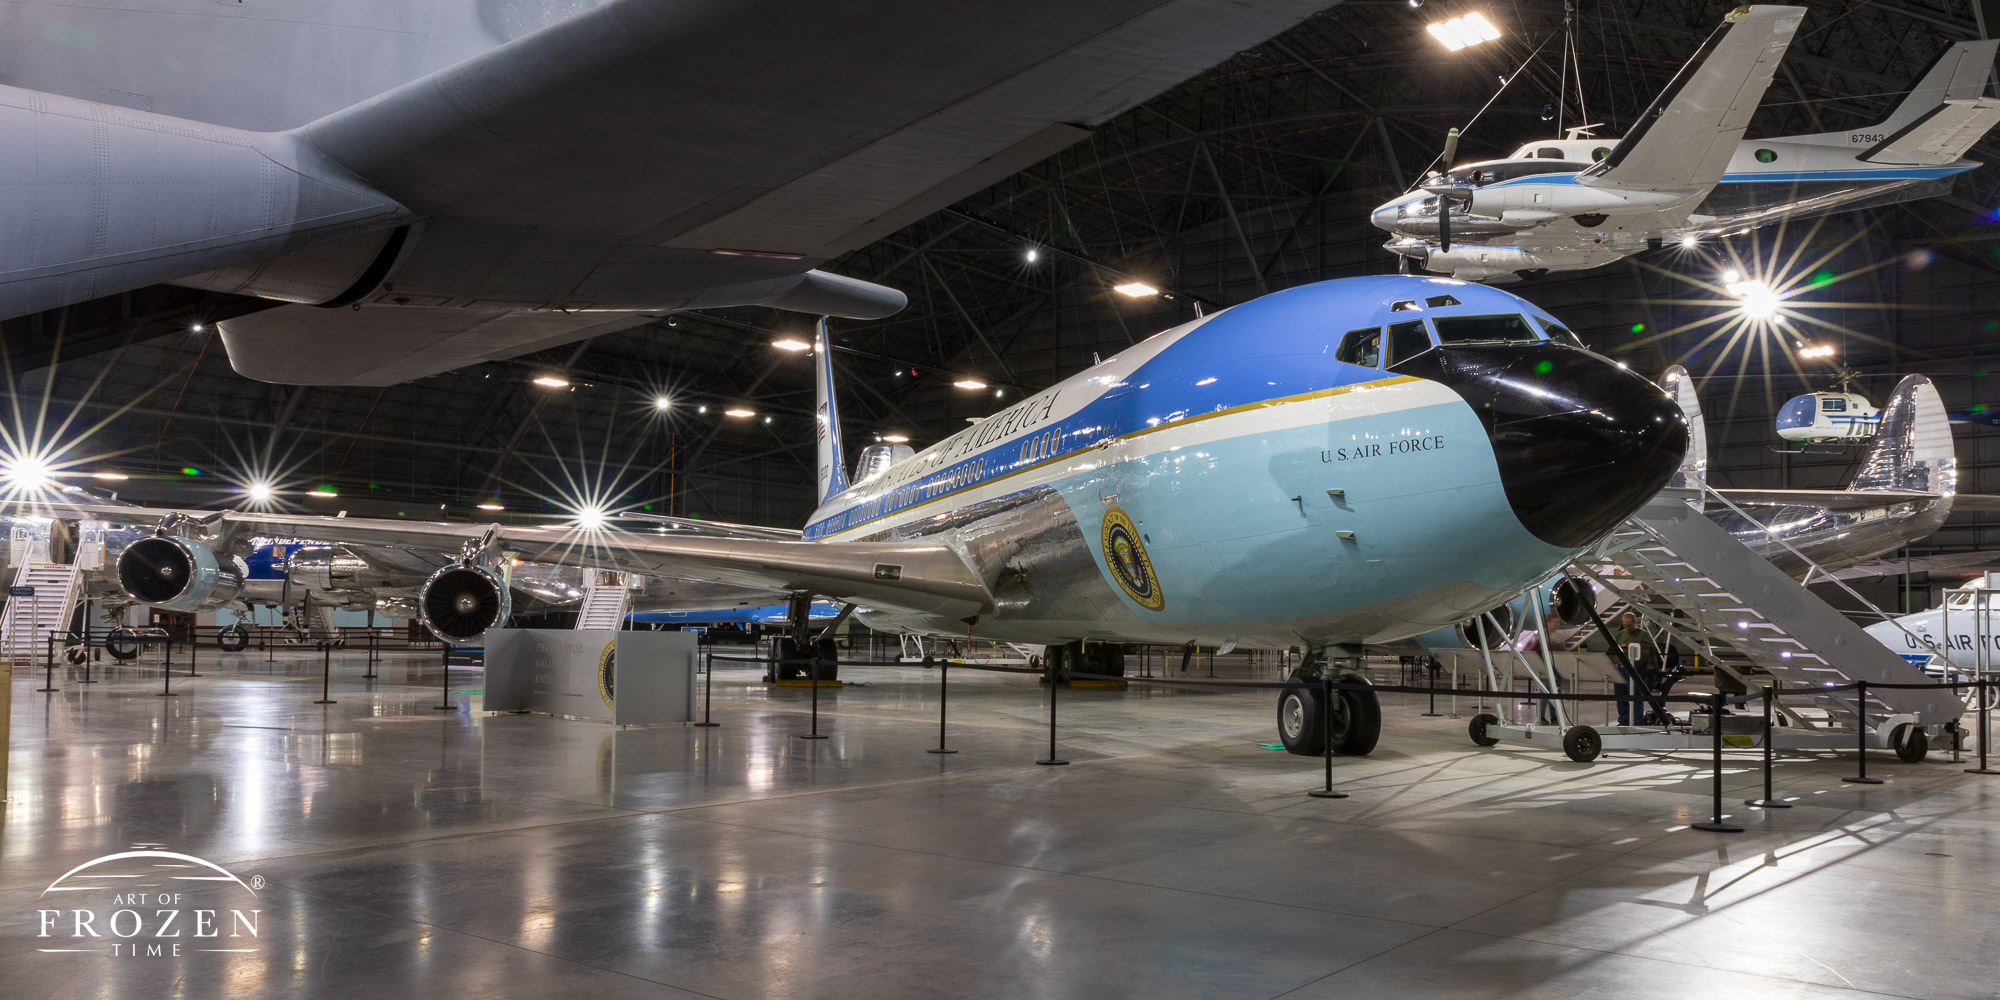 A front and side panorama of the former Air Force One aircraft known as SAM 26000 displaying its robin egg blue color as it sits in the National Museum of the US Air Force.